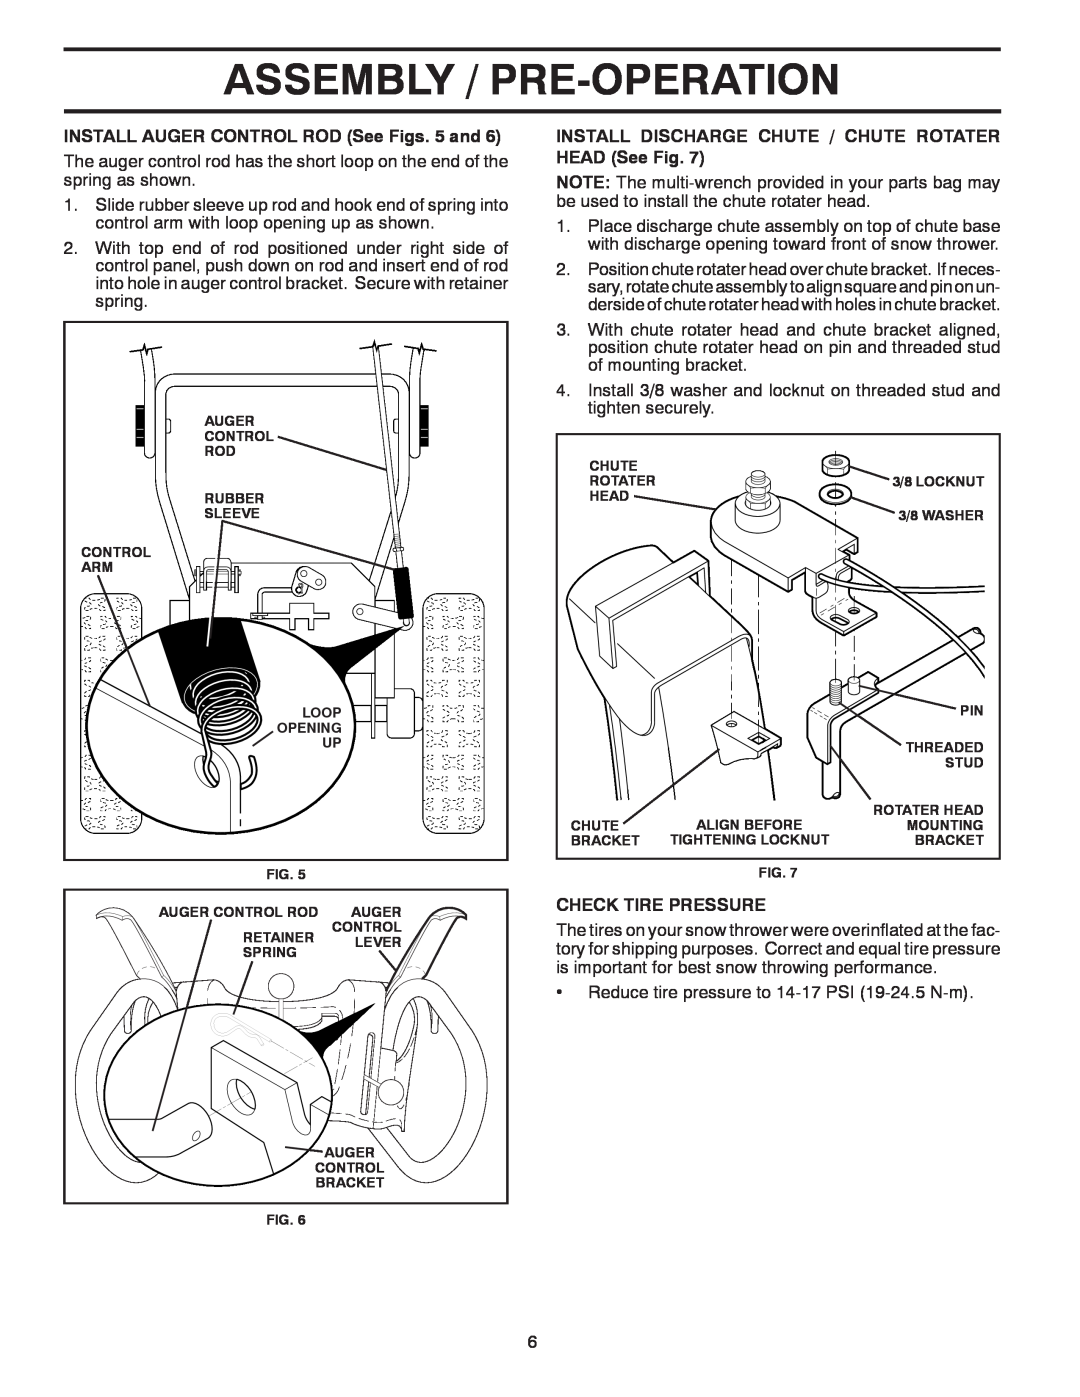 Poulan 421602 owner manual Assembly / Pre-Operation, INSTALL AUGER CONTROL ROD See Figs. 5 and, Check Tire Pressure 